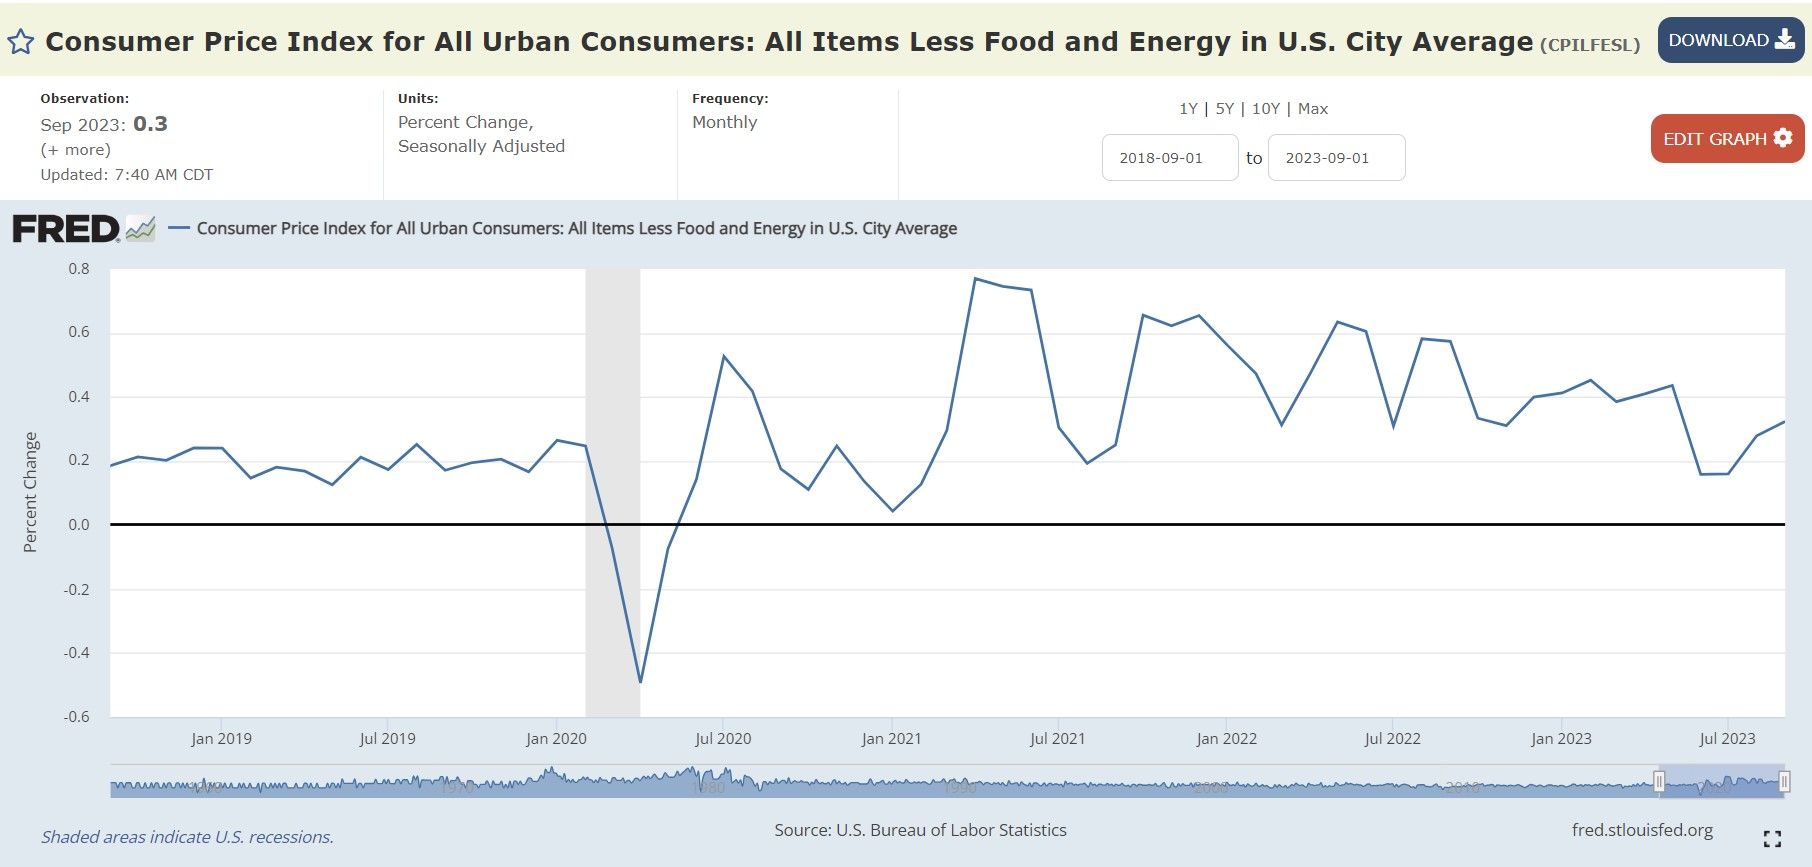  Consumer Price Index for All Urban Consumers: All Items Less Food and Energy